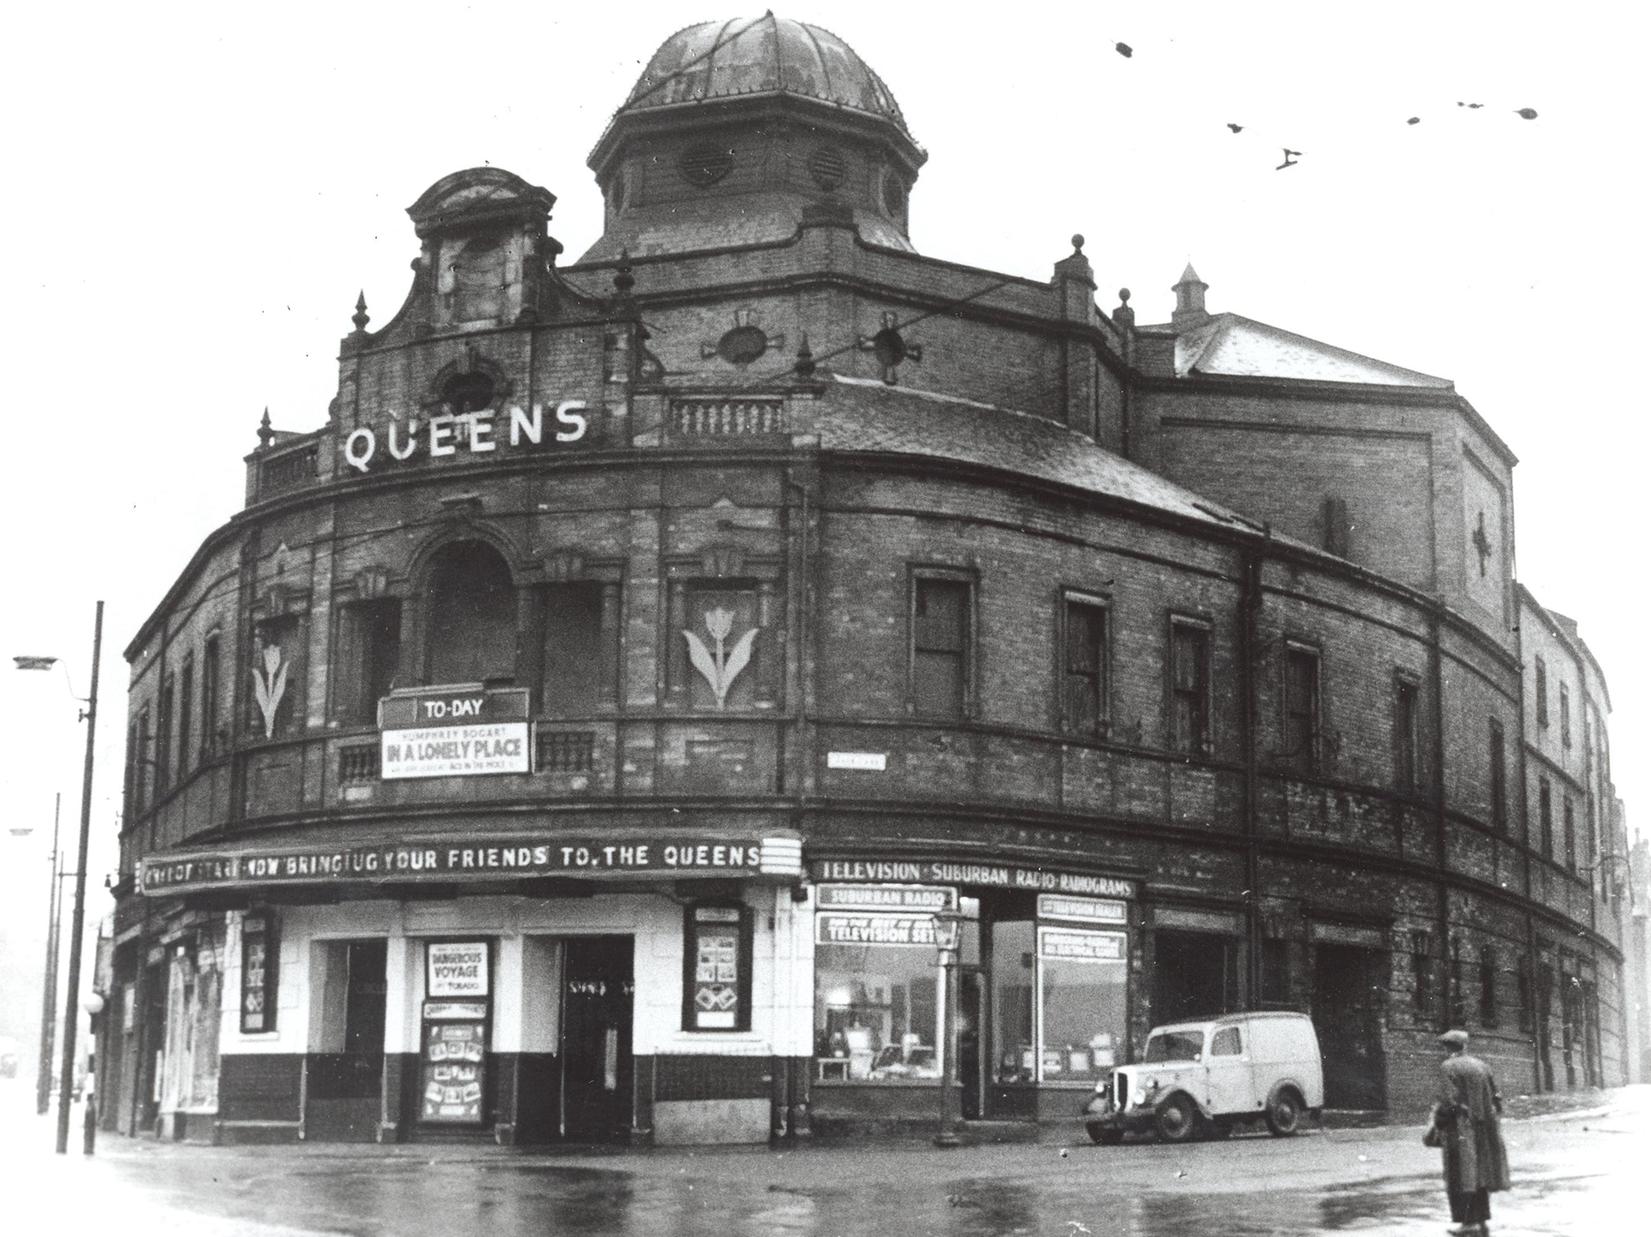 The Queens cinema at Holbeck.